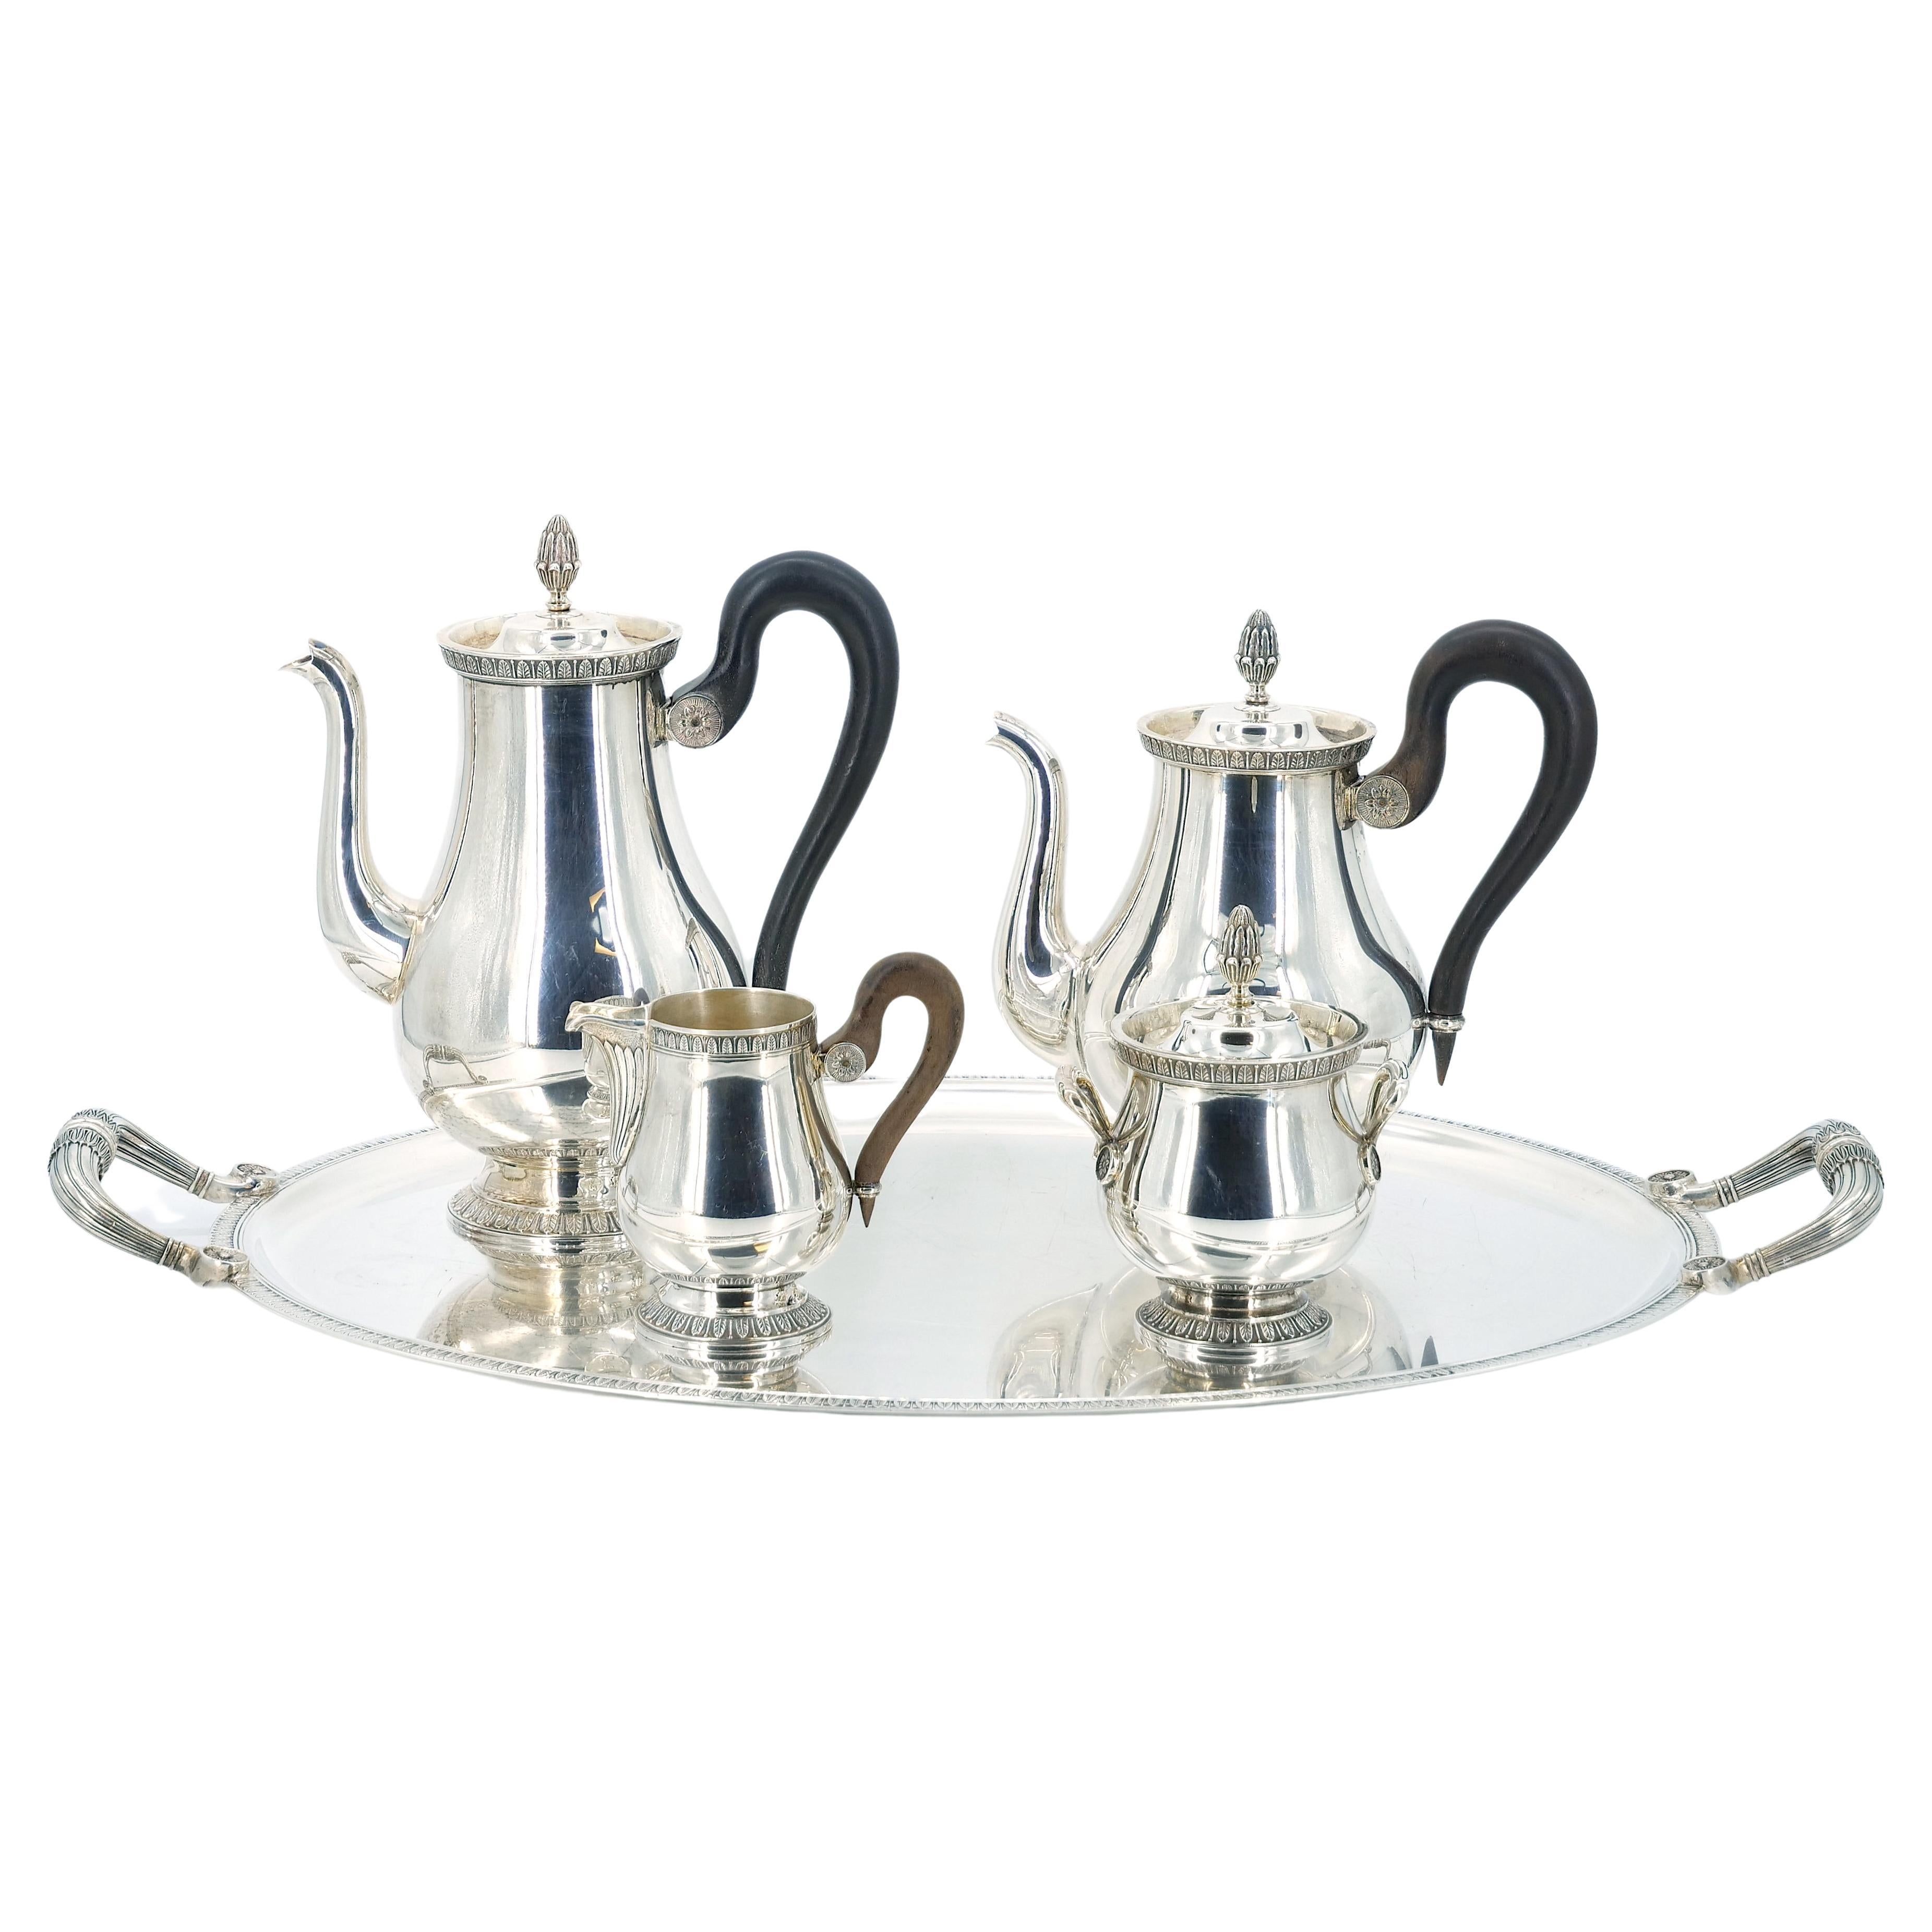 French Silver Plate Five Piece Tea / Coffee Service by Christofle